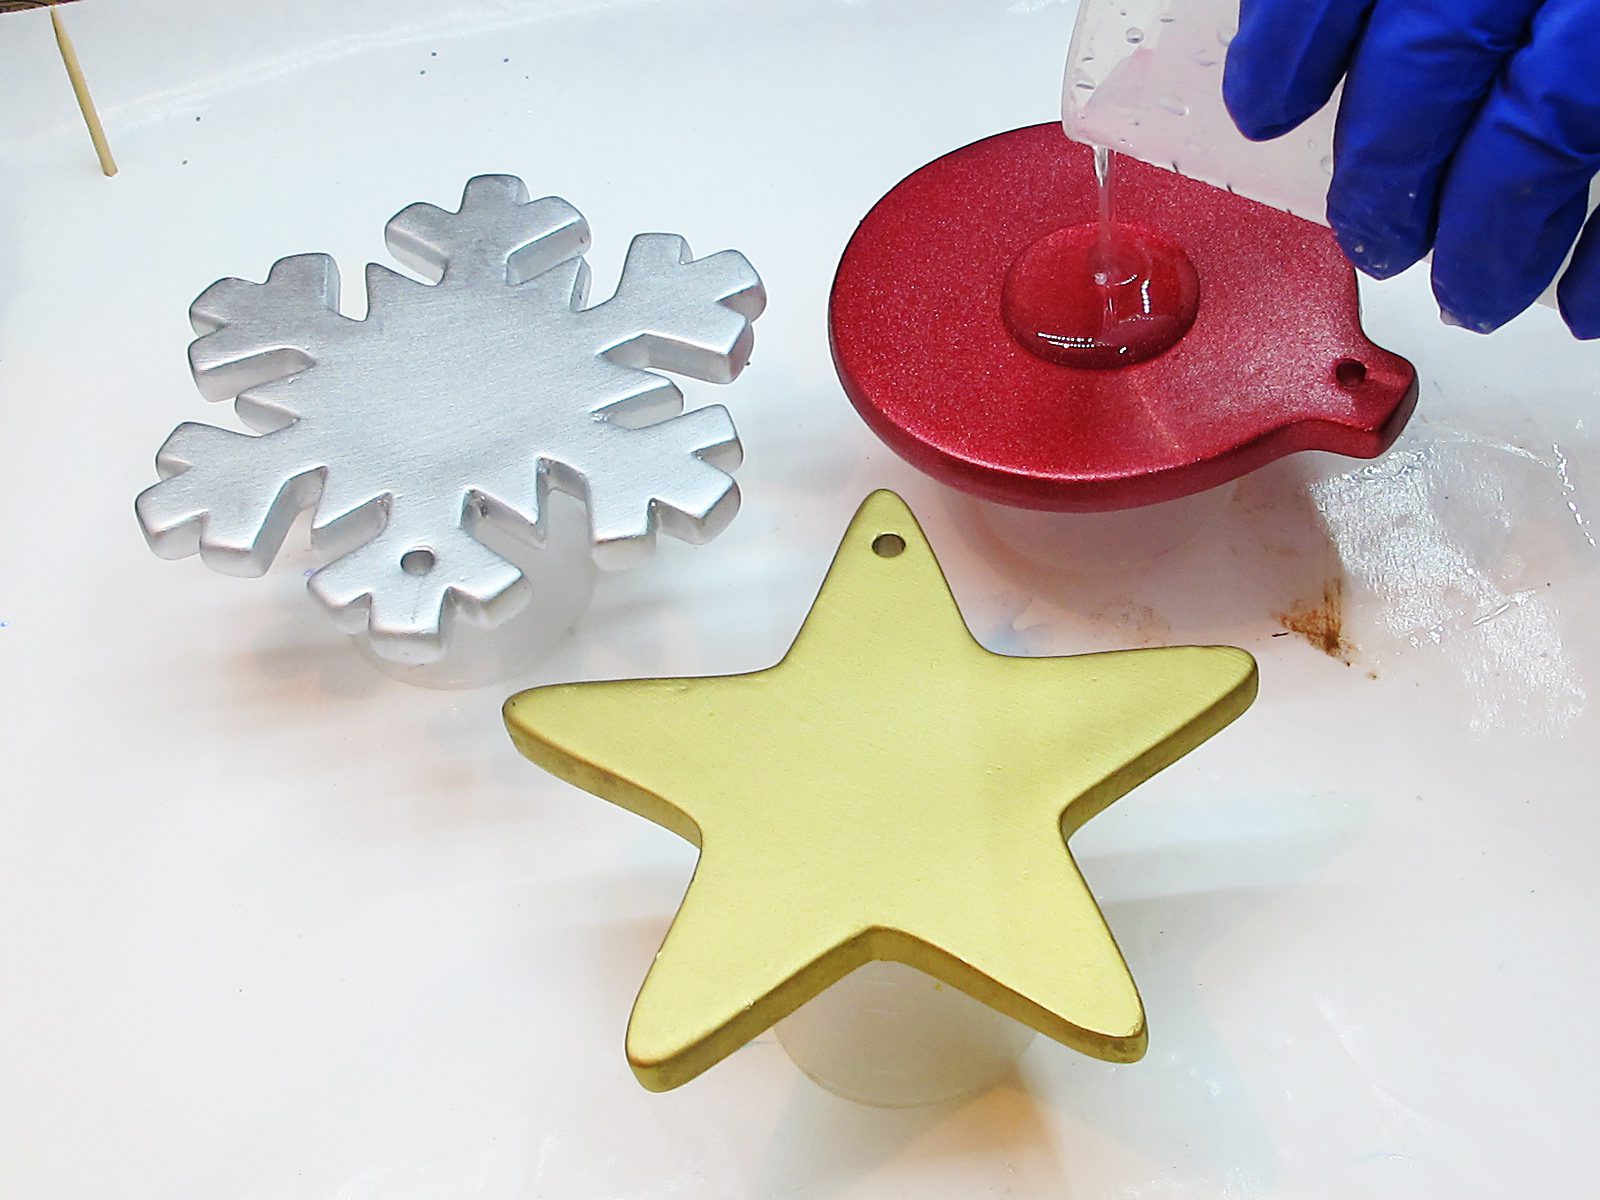 Pouring resin onto Christmas ornaments.